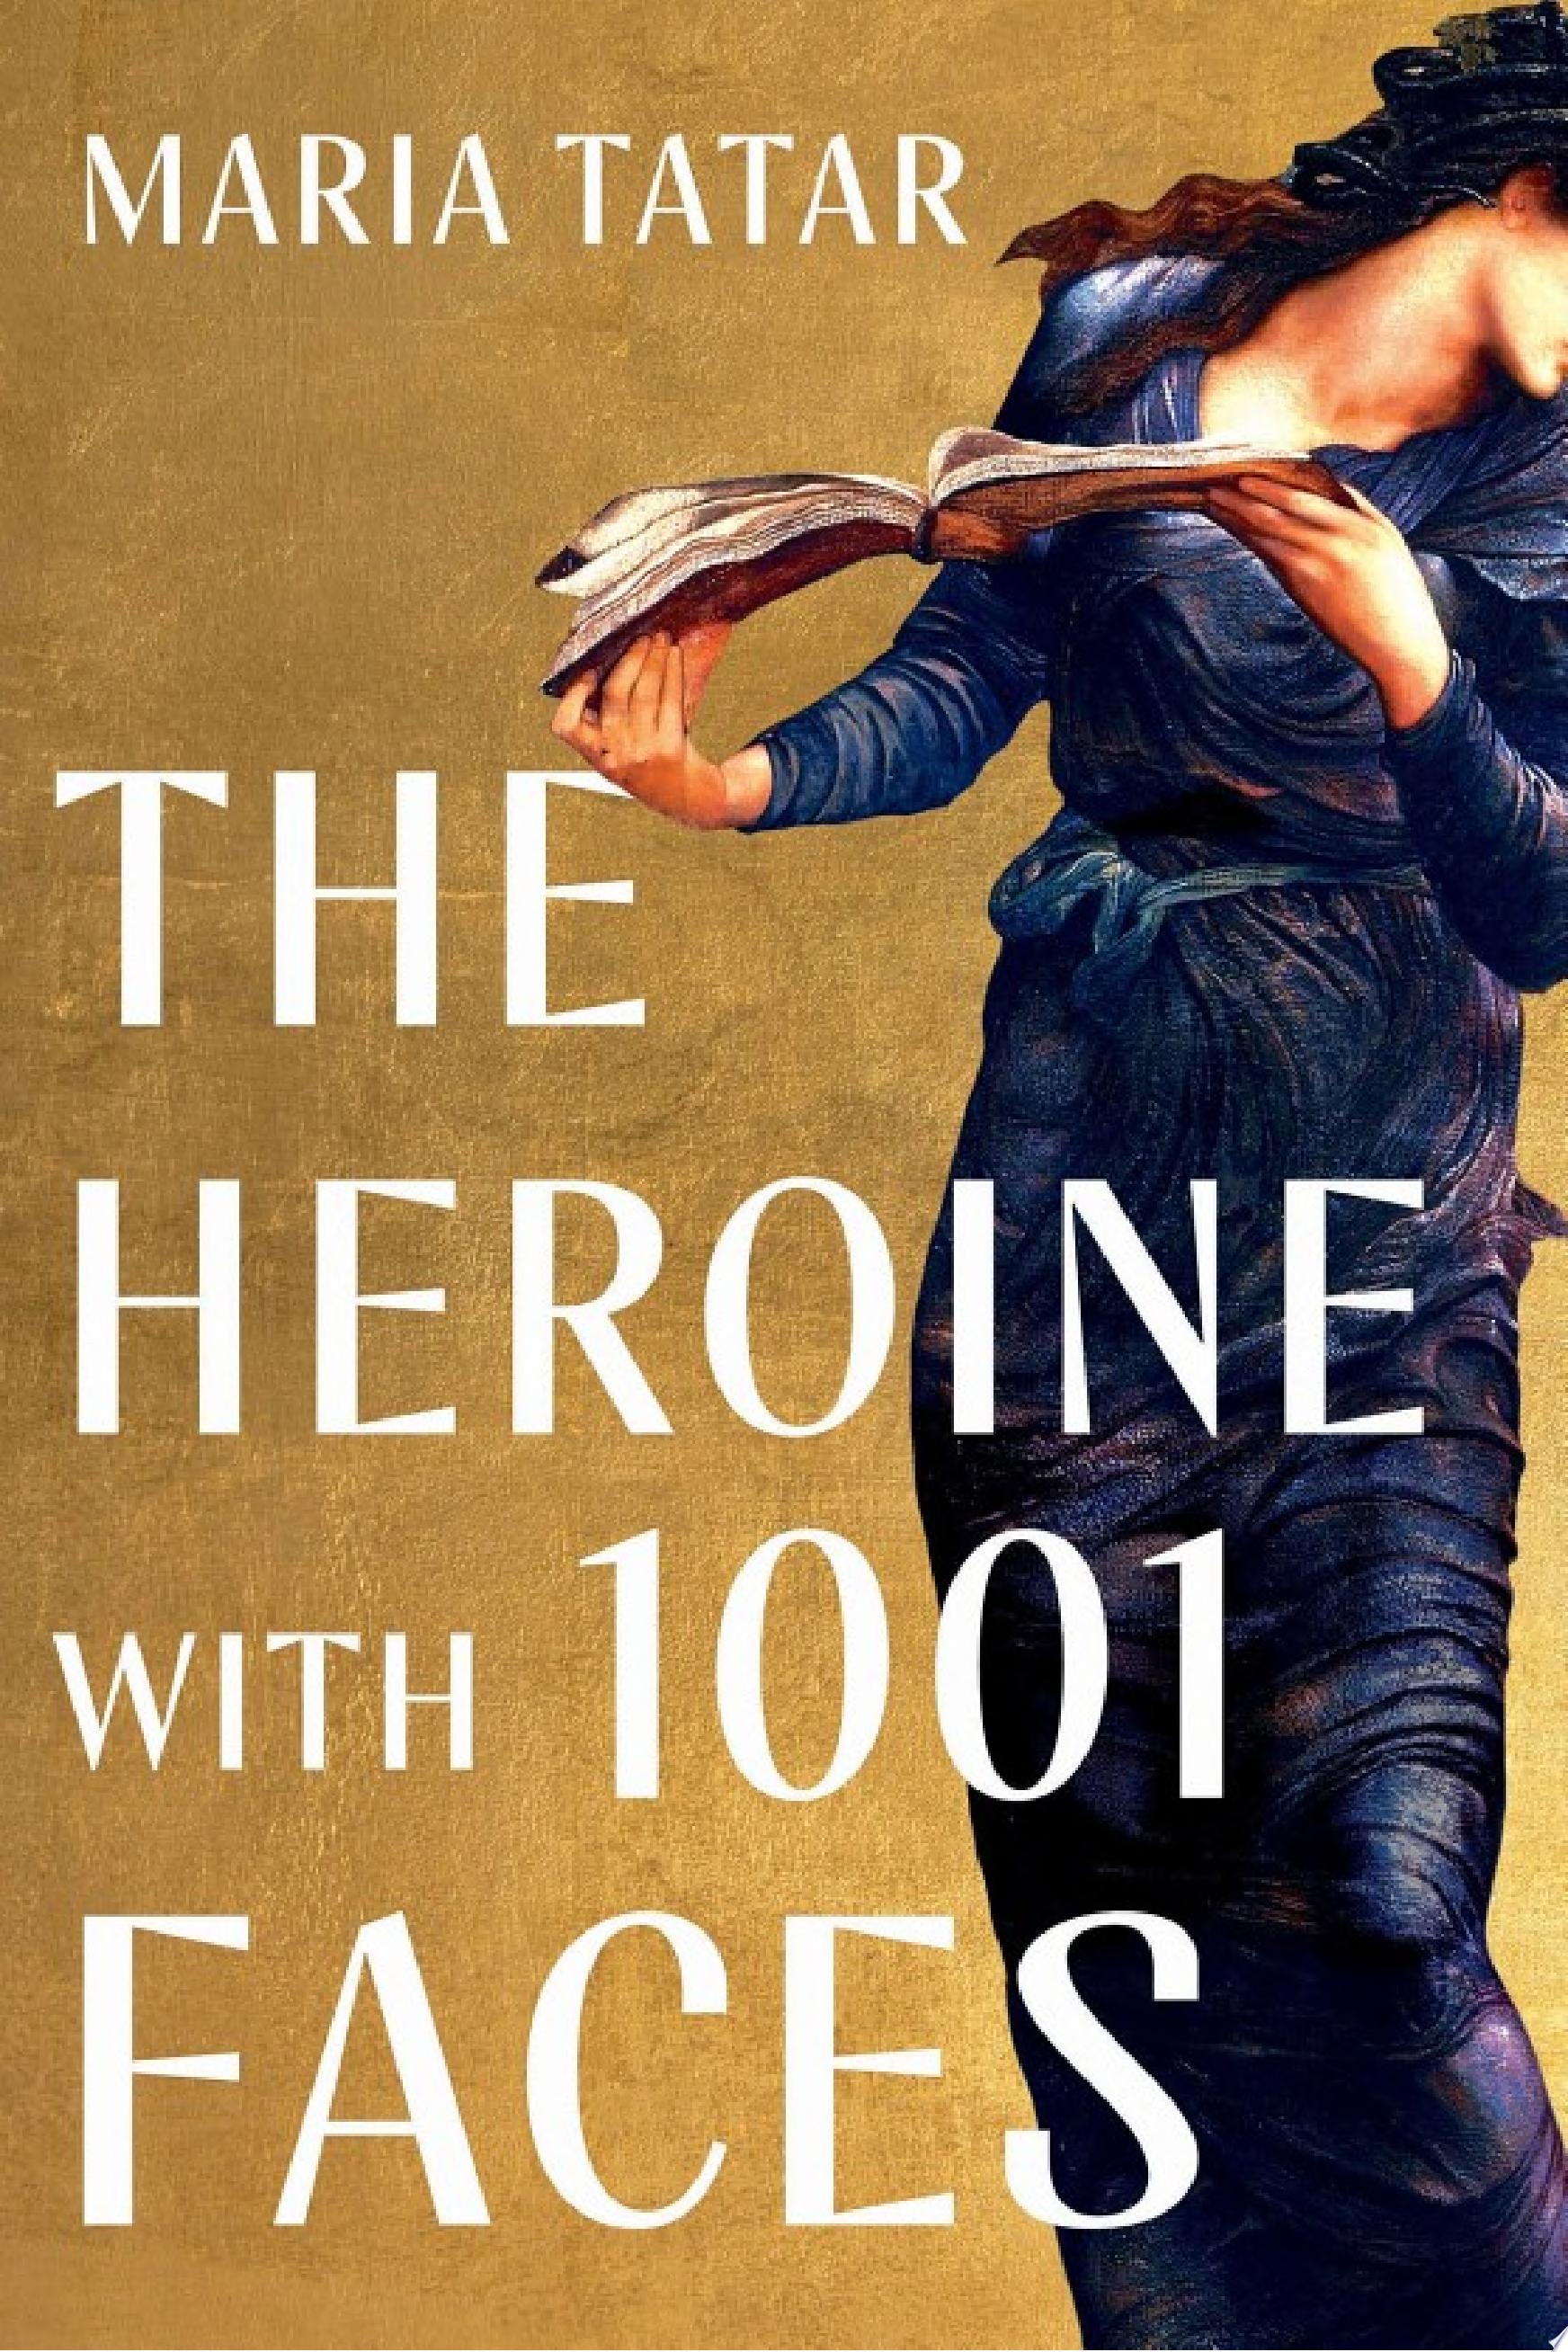 Image for "The Heroine with 1001 Faces"